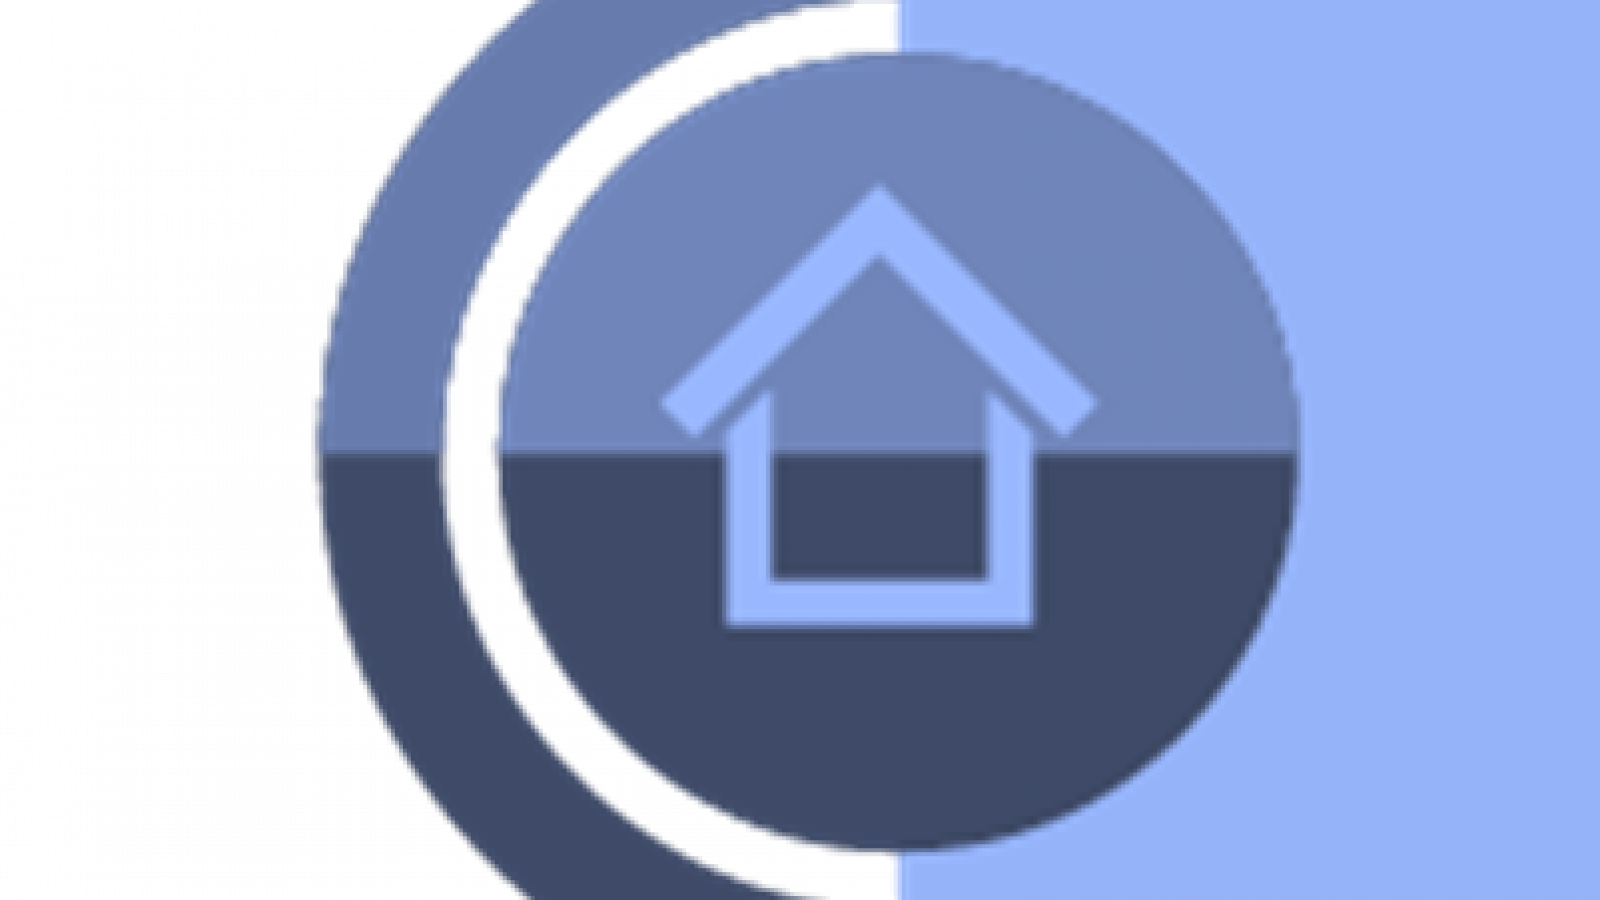 Picture showing a logo of a house